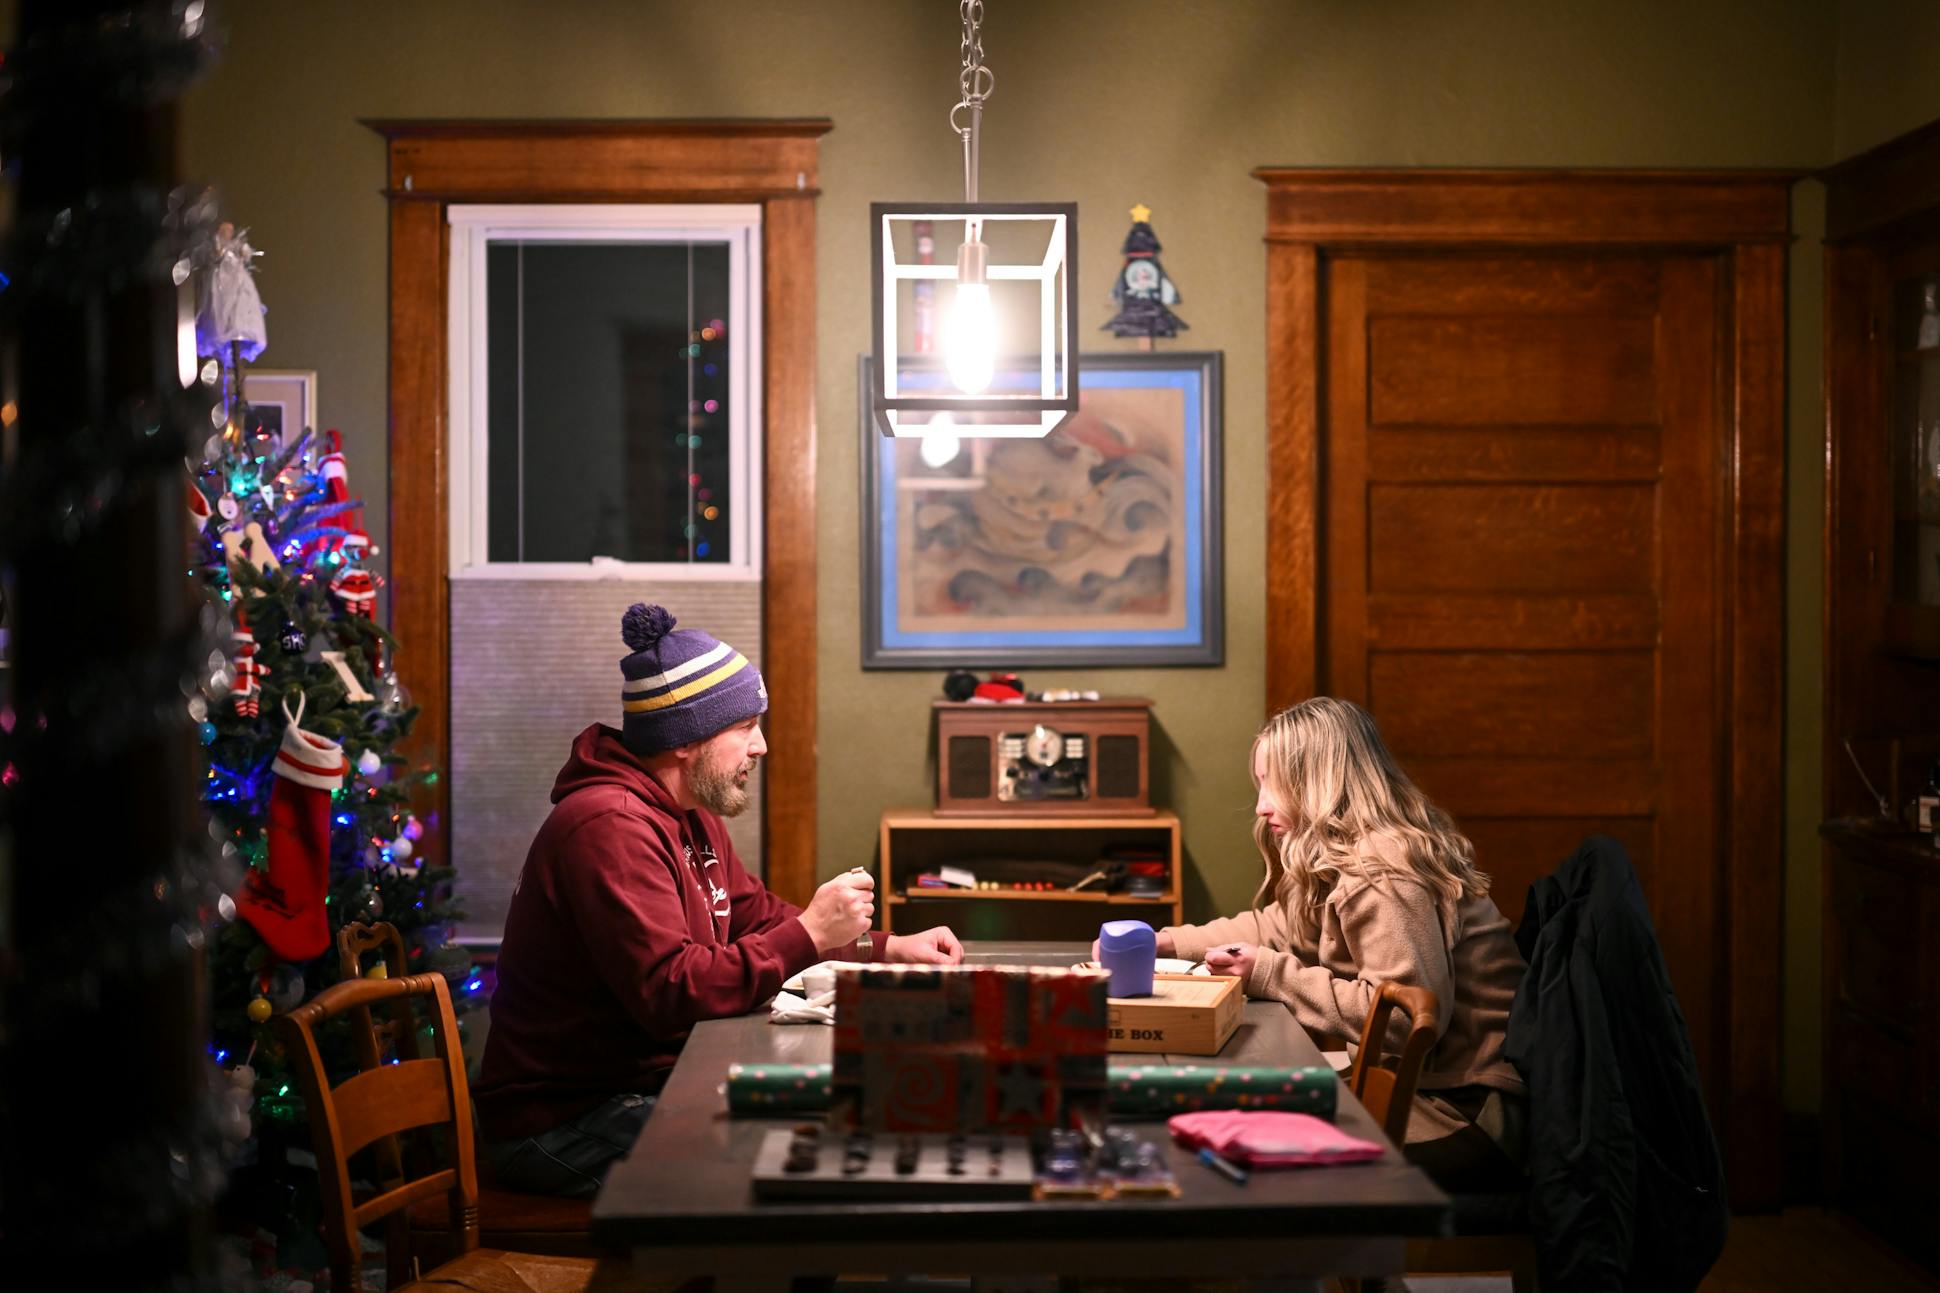 Chad Daniels ate dinner with his 18-year old daughter, Olivia,,at their home in Fergus Falls, Minn.